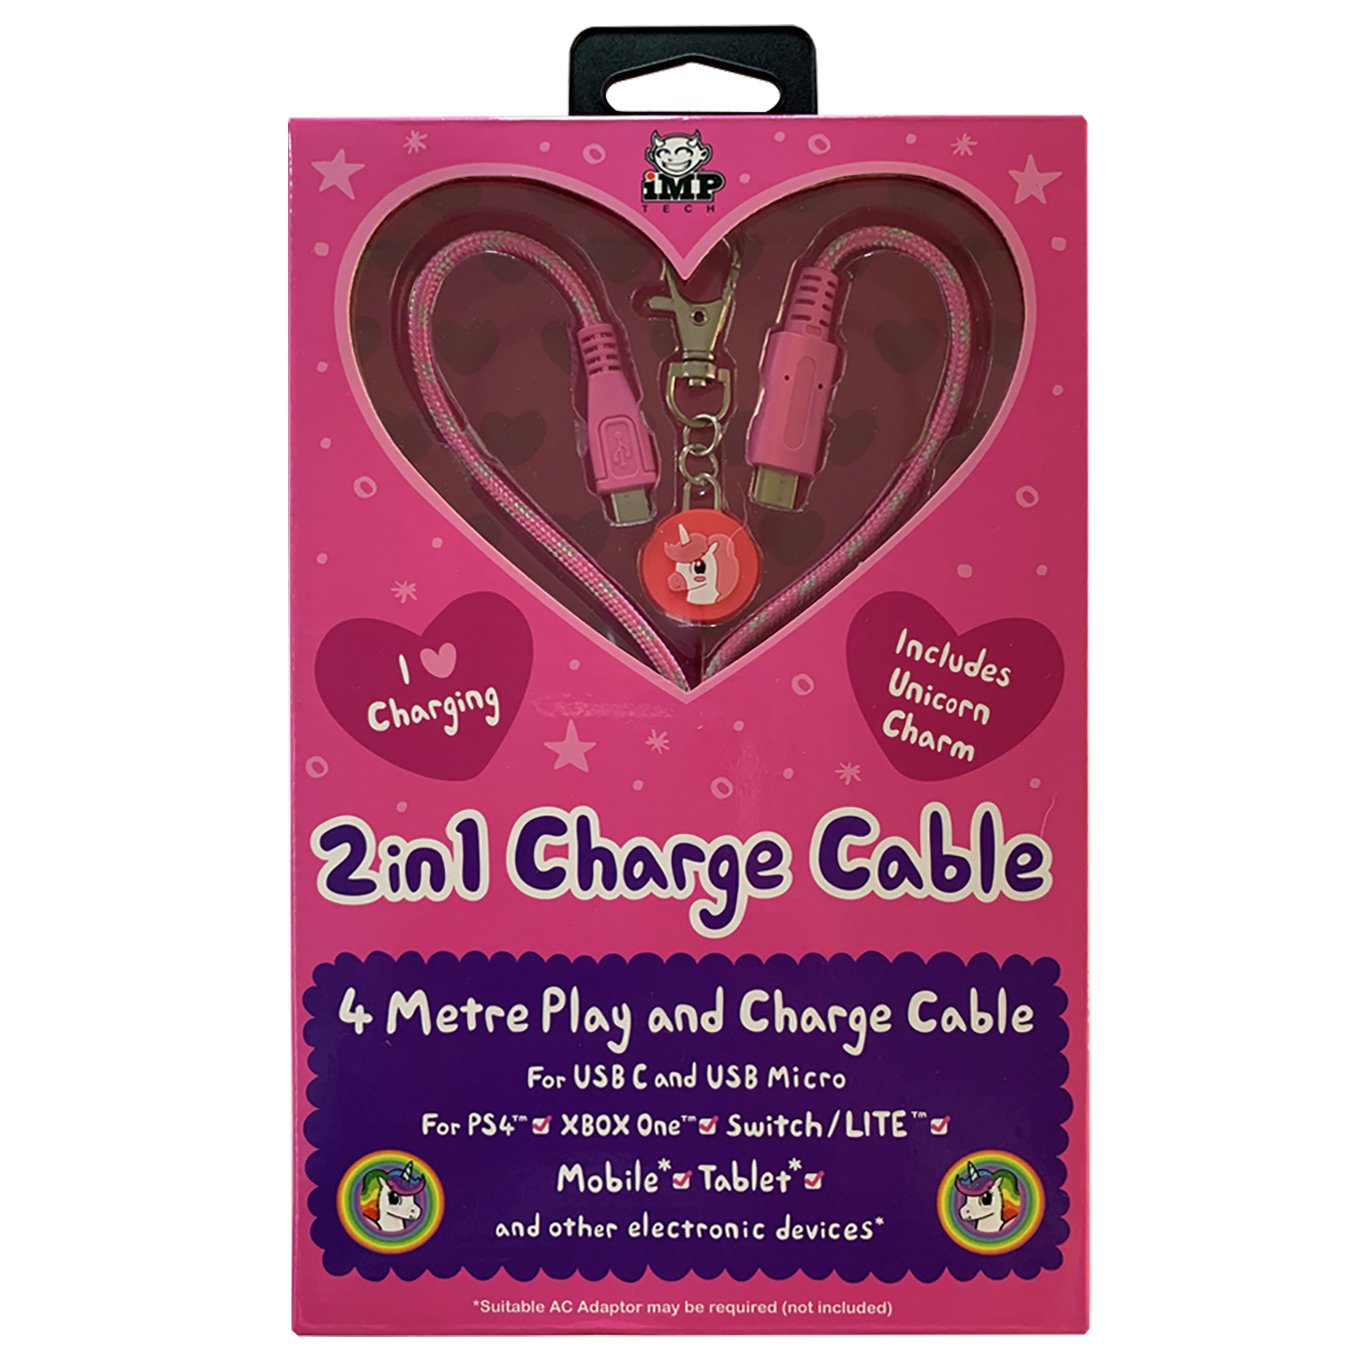 Dual Play & Charge 4m Cable with Unicorn Charm Review